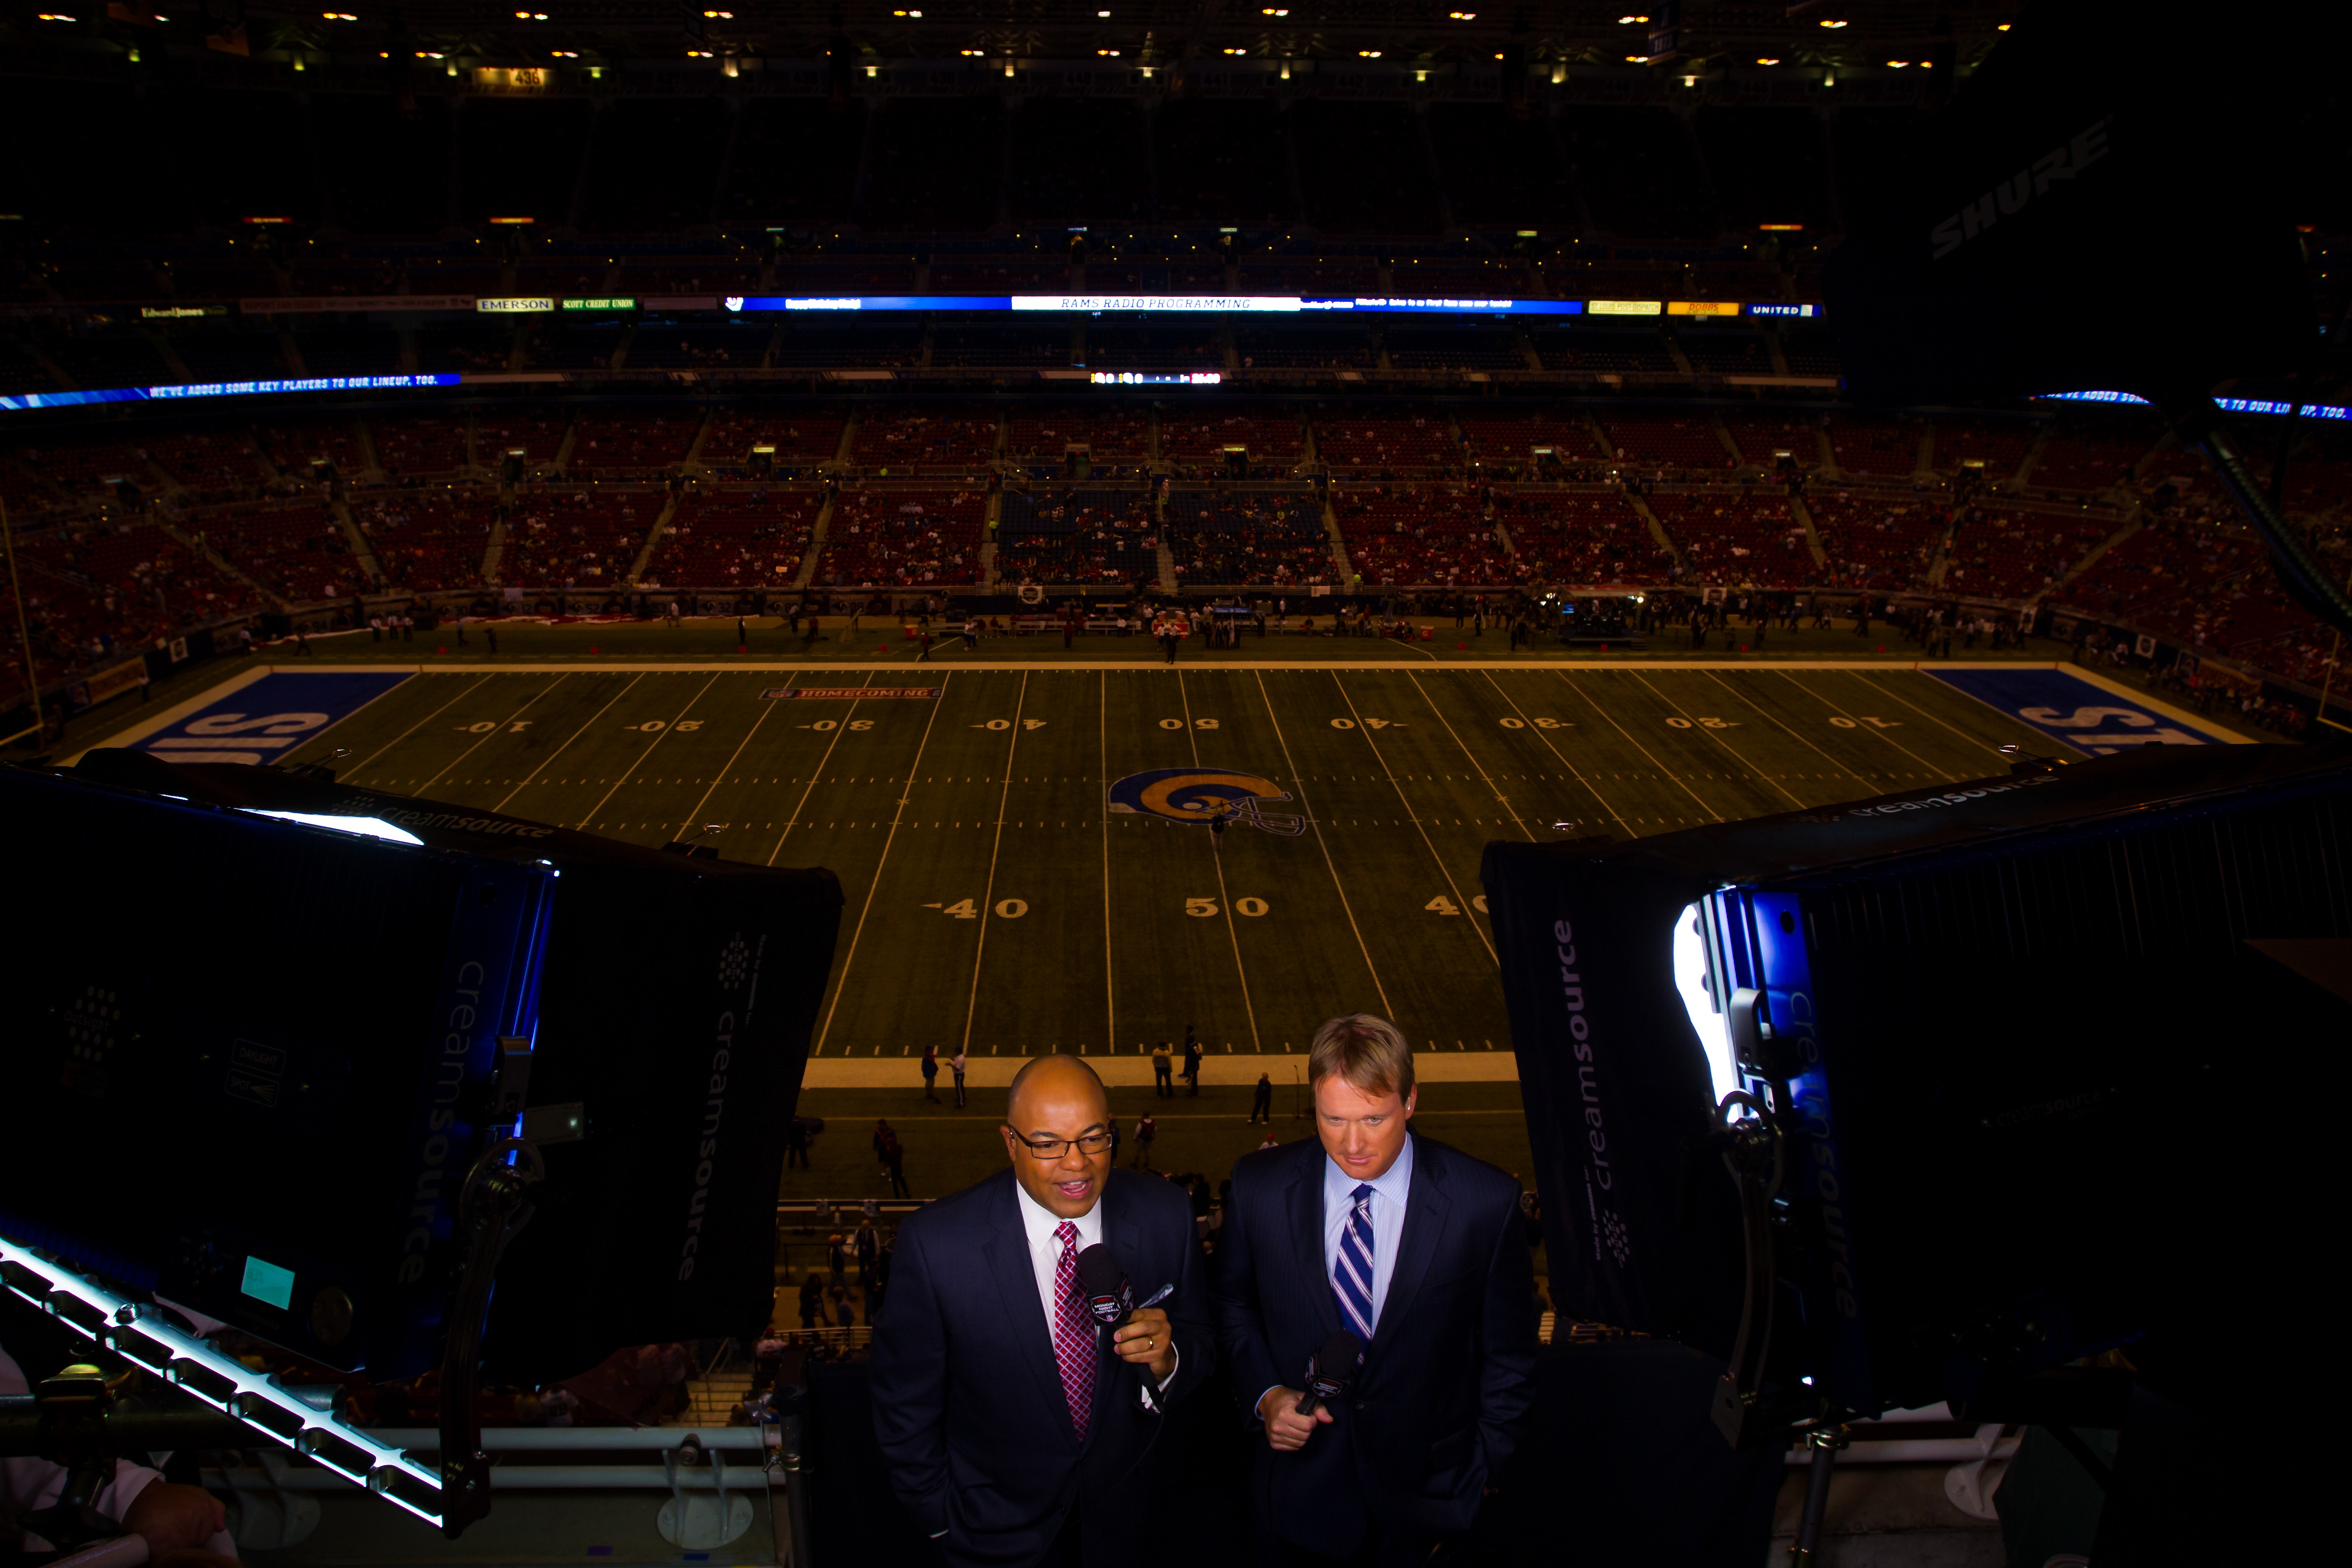 ESPN play-by-play announcer Mike Tirico (left) and analyst Jon Gruden kick off the Monday Night Football broadcast between the St. Louis Rams and the San Francisco 49ers at the Edward Jones Dome in downtown St. Louis. (Photo by Guy Rhodes-USA TODAY  Sports)